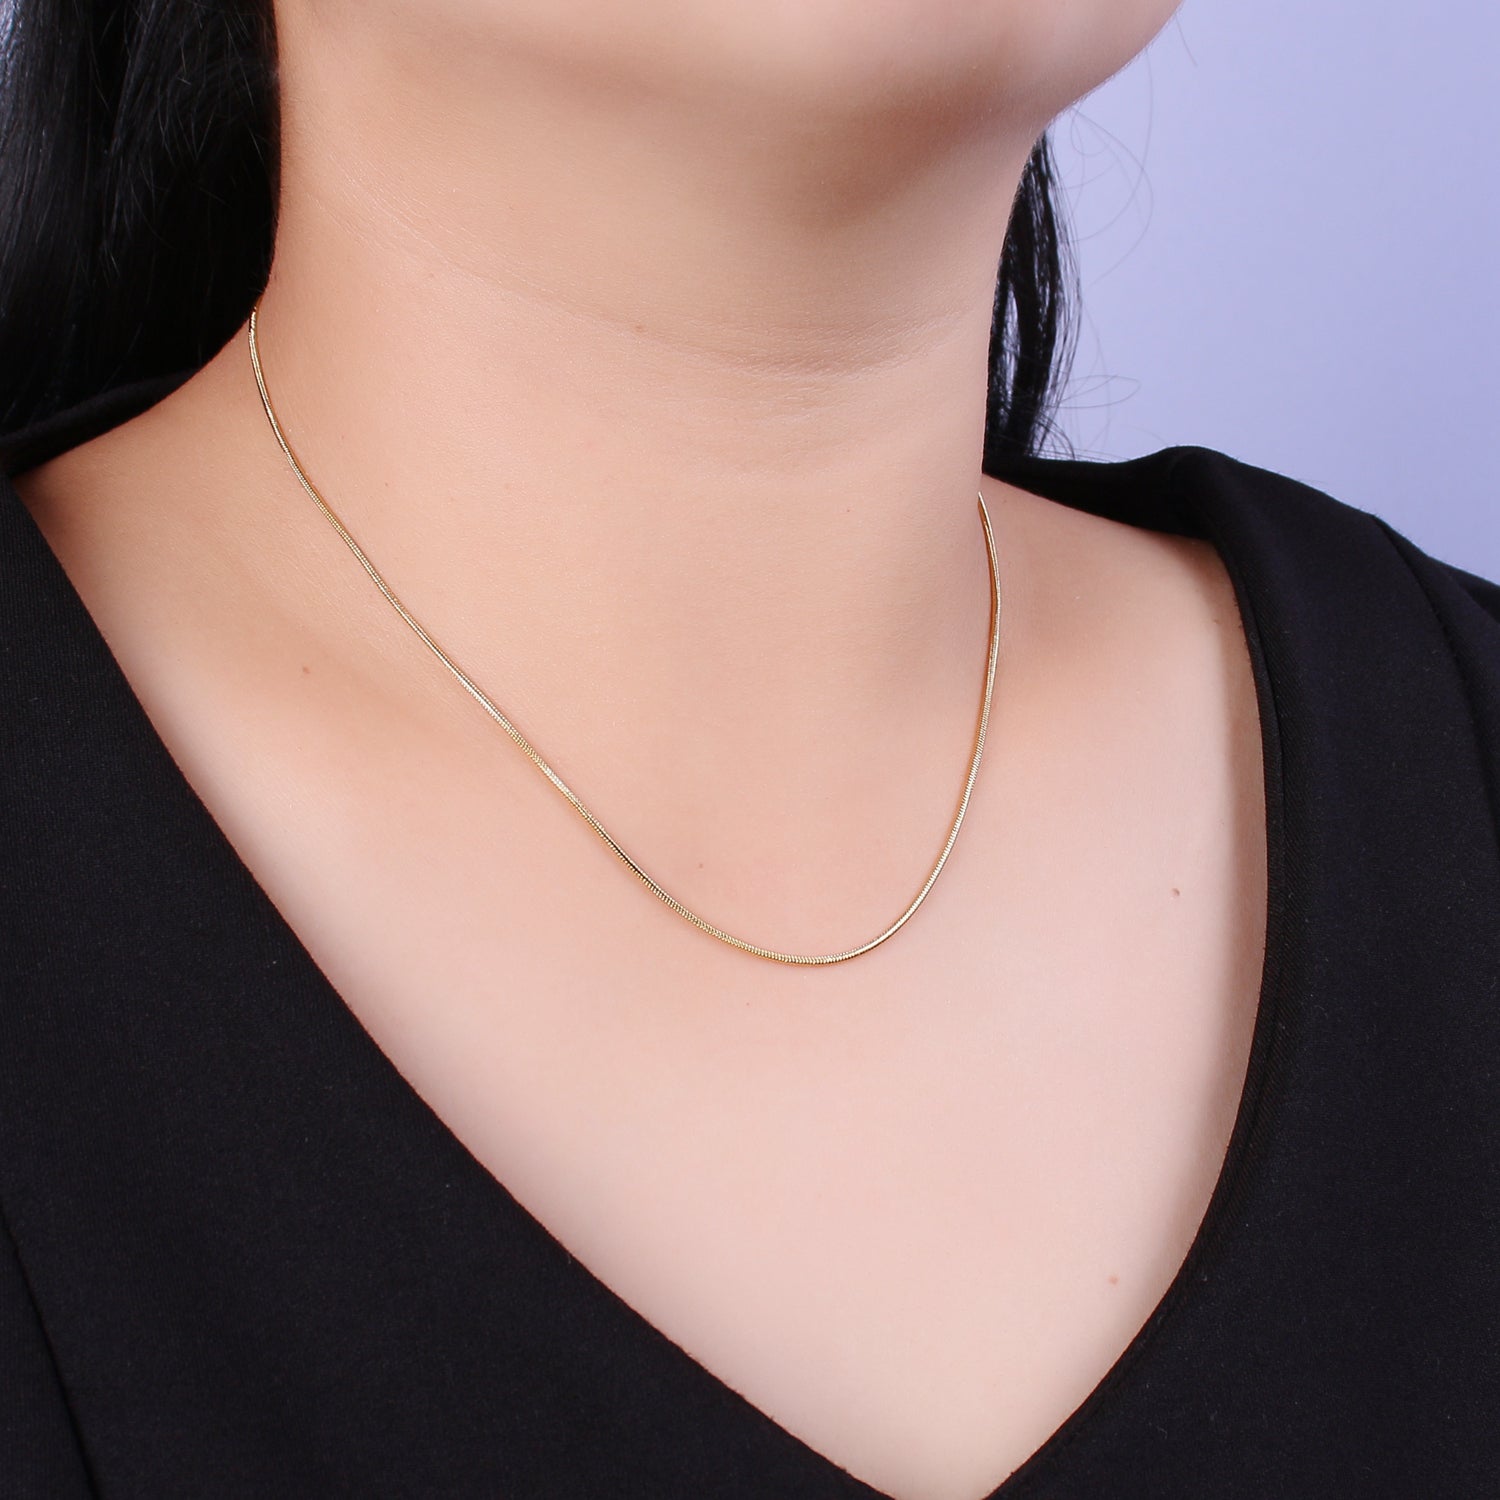 Thin Herringbone Chain Necklace - Dainty 1.1mm Gold Snake Chain - 15.7 inches Layering Necklace Ready To Wear w/ Lobster Clasp - DLUXCA